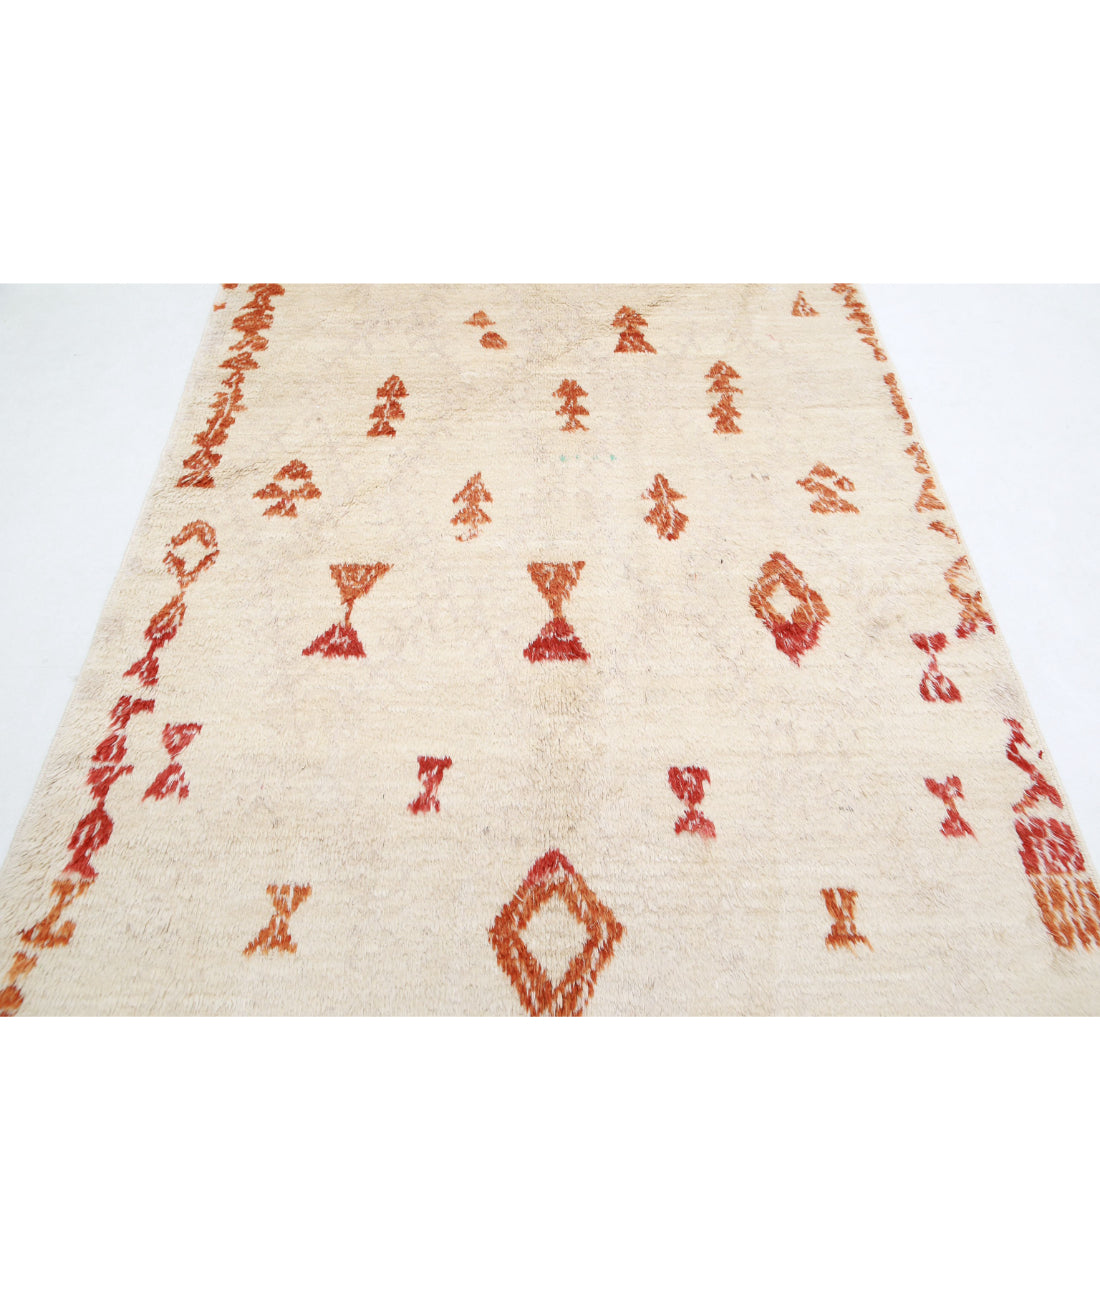 Hand Knotted Tribal Moroccan Wool Rug - 5'2'' x 7'10'' 5'2'' x 7'10'' (155 X 235) / Ivory / Red